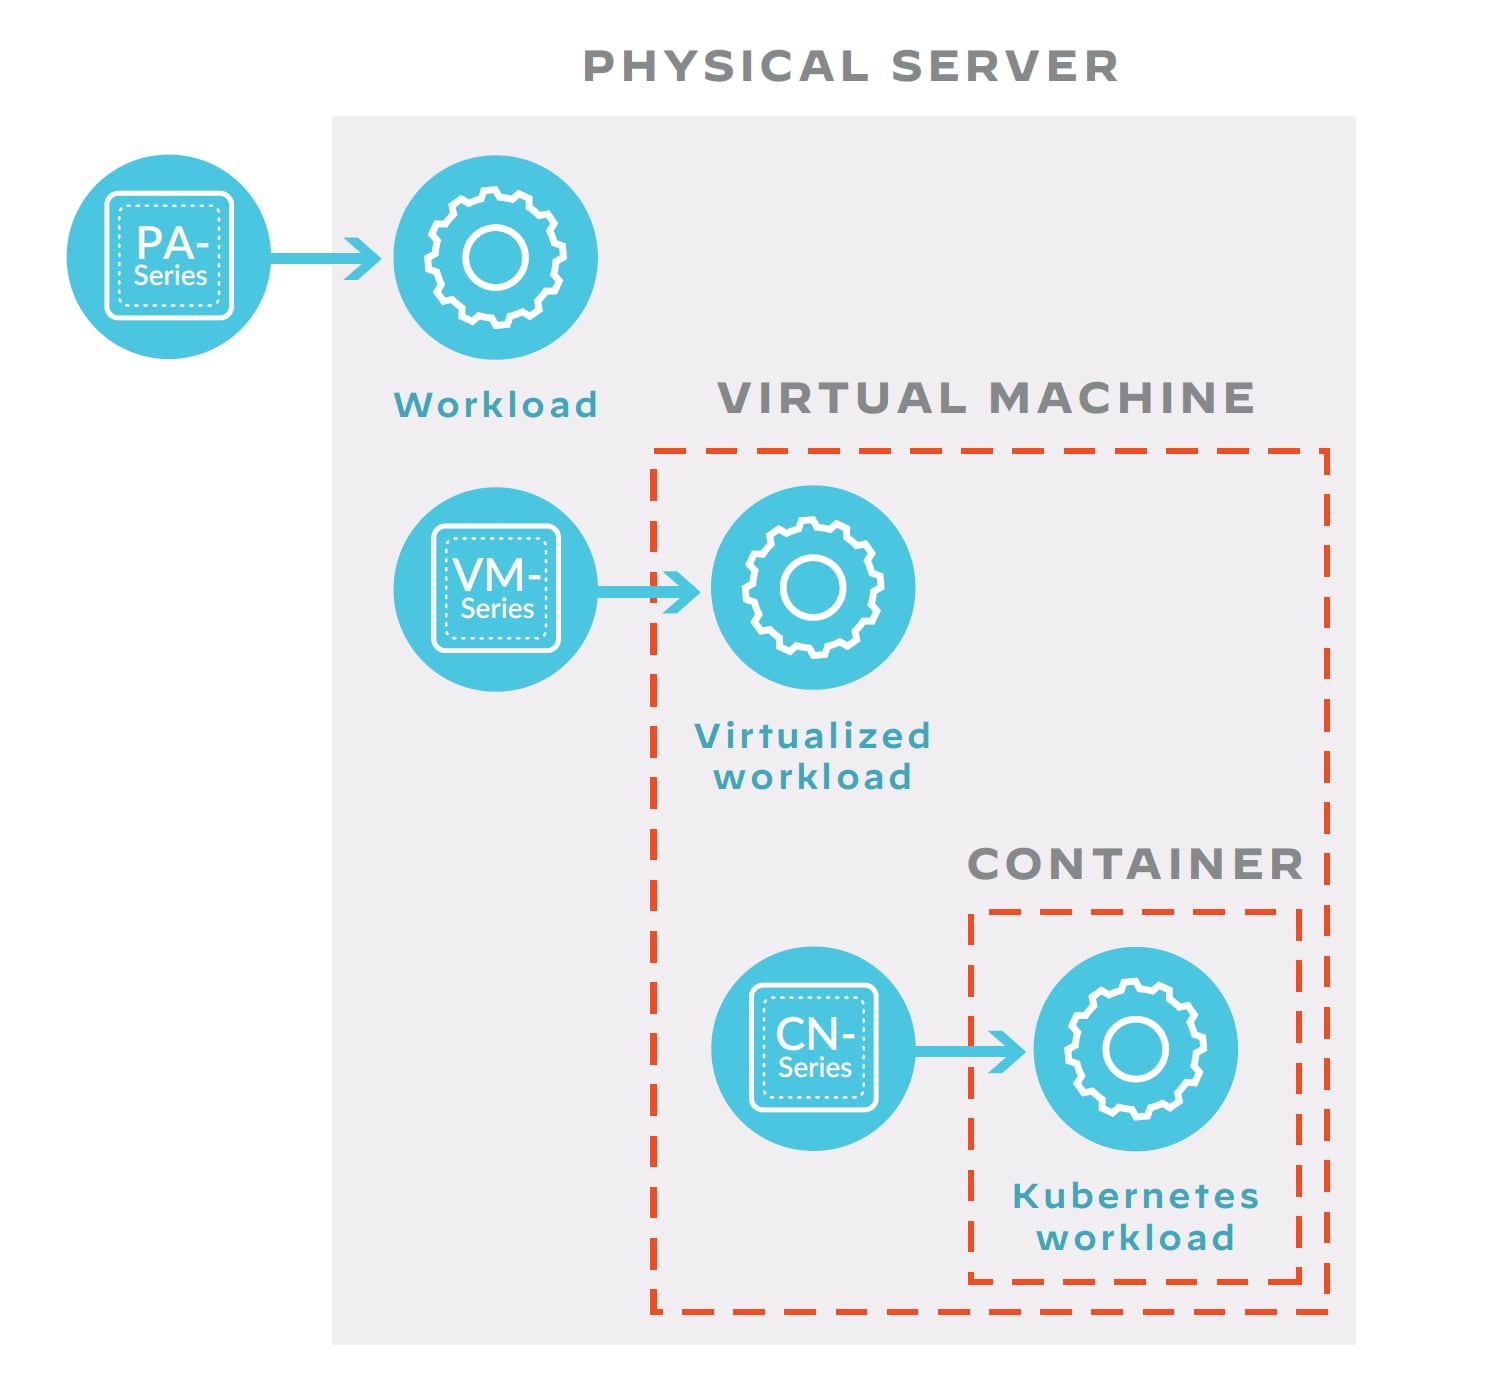 The graphic shows how different Palo Alto Networks firewall form factors protect different types of workloads. This includes a workload on a physical server portected by the PA-Series NGFW, a virtualized workload on a virtual machine protected by VM-Series and a Kubernetes workload in a container protected by CN-Series. 